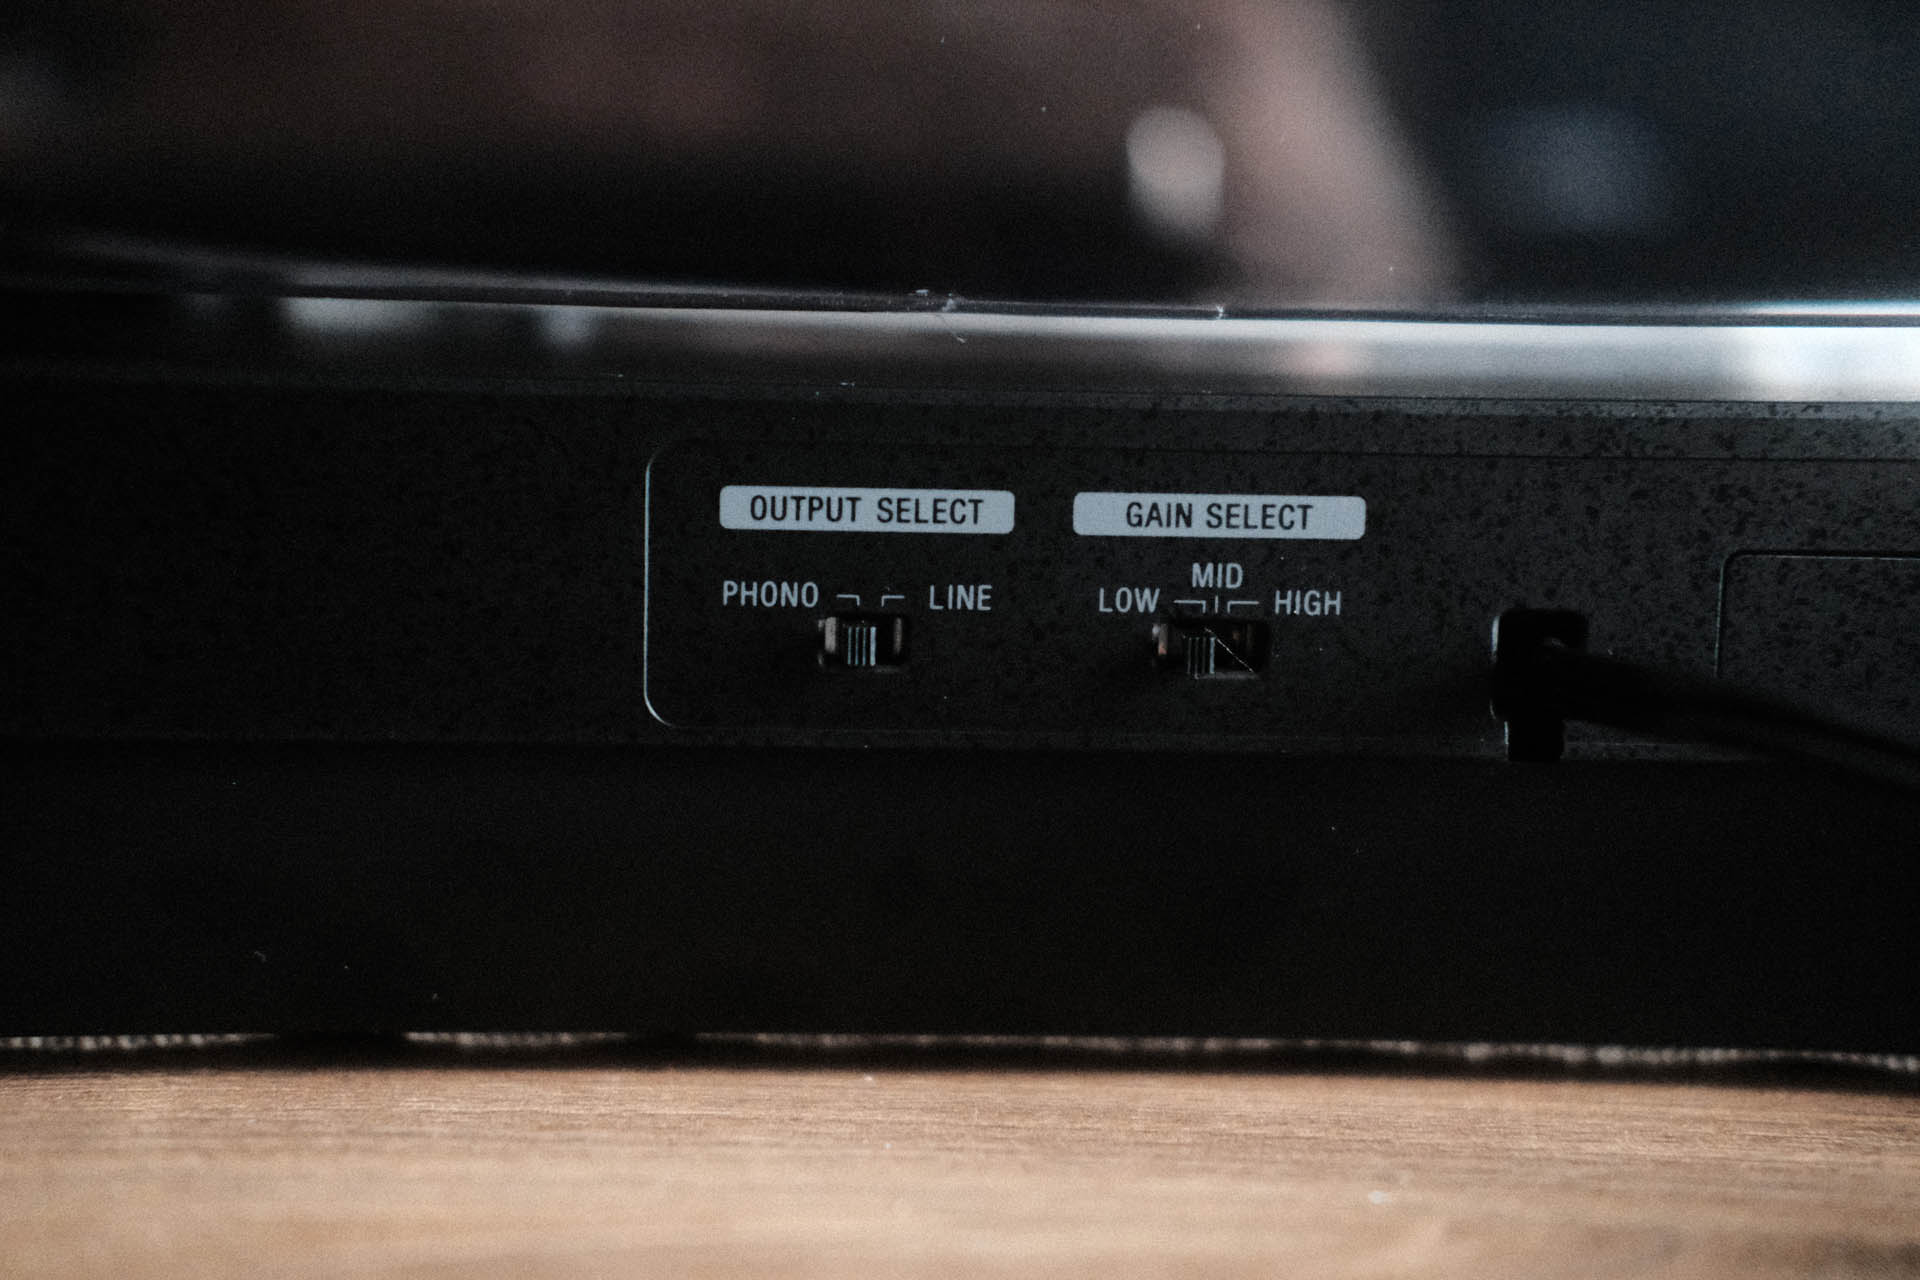 Sony PS-LX310BT Output Select